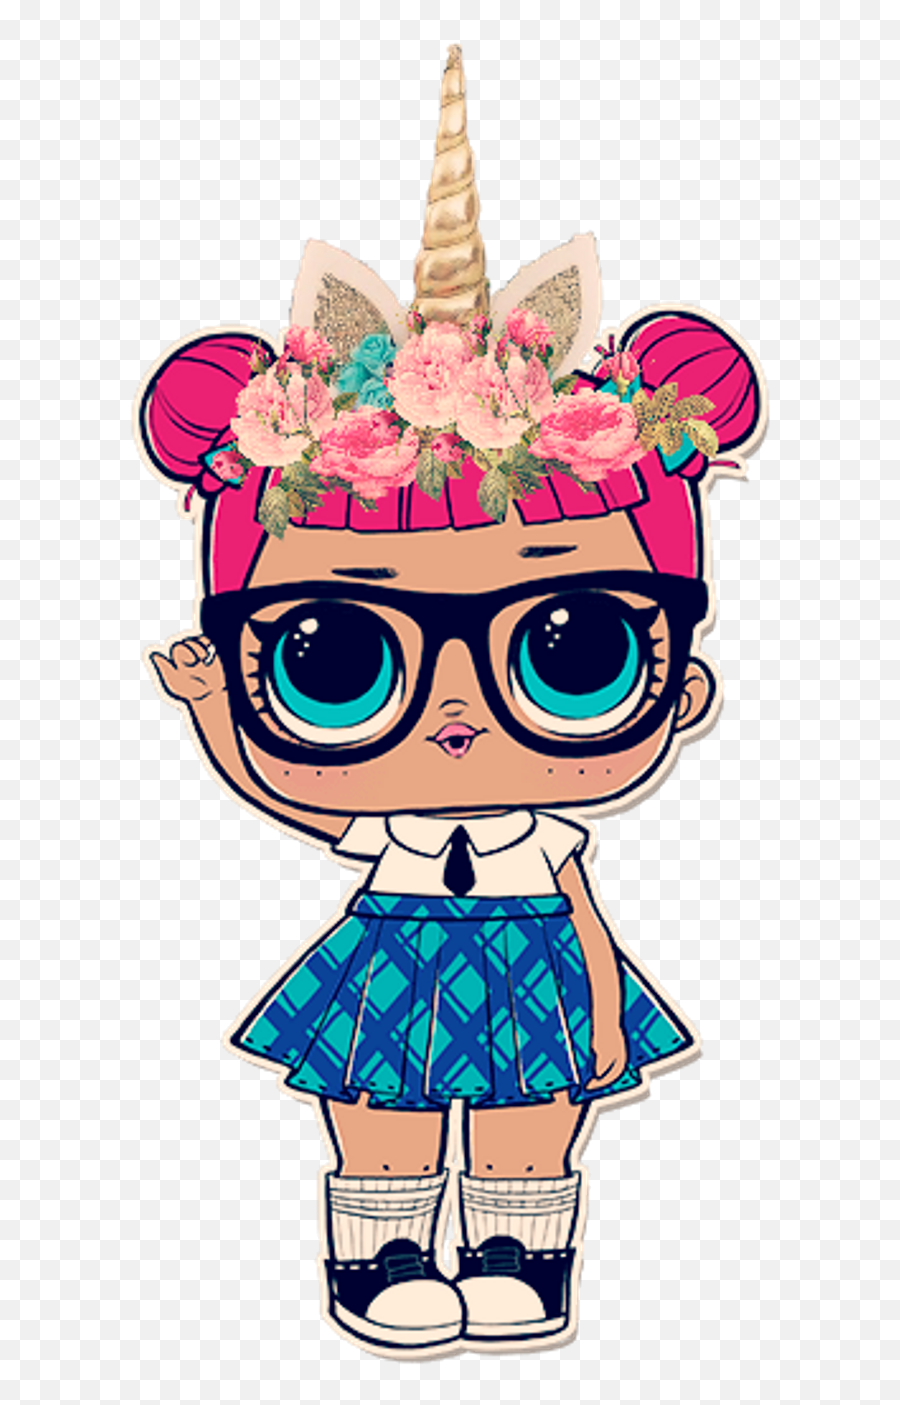 Lol Doll Png Clipart - Full Size Clipart 4126109 Pinclipart Lol